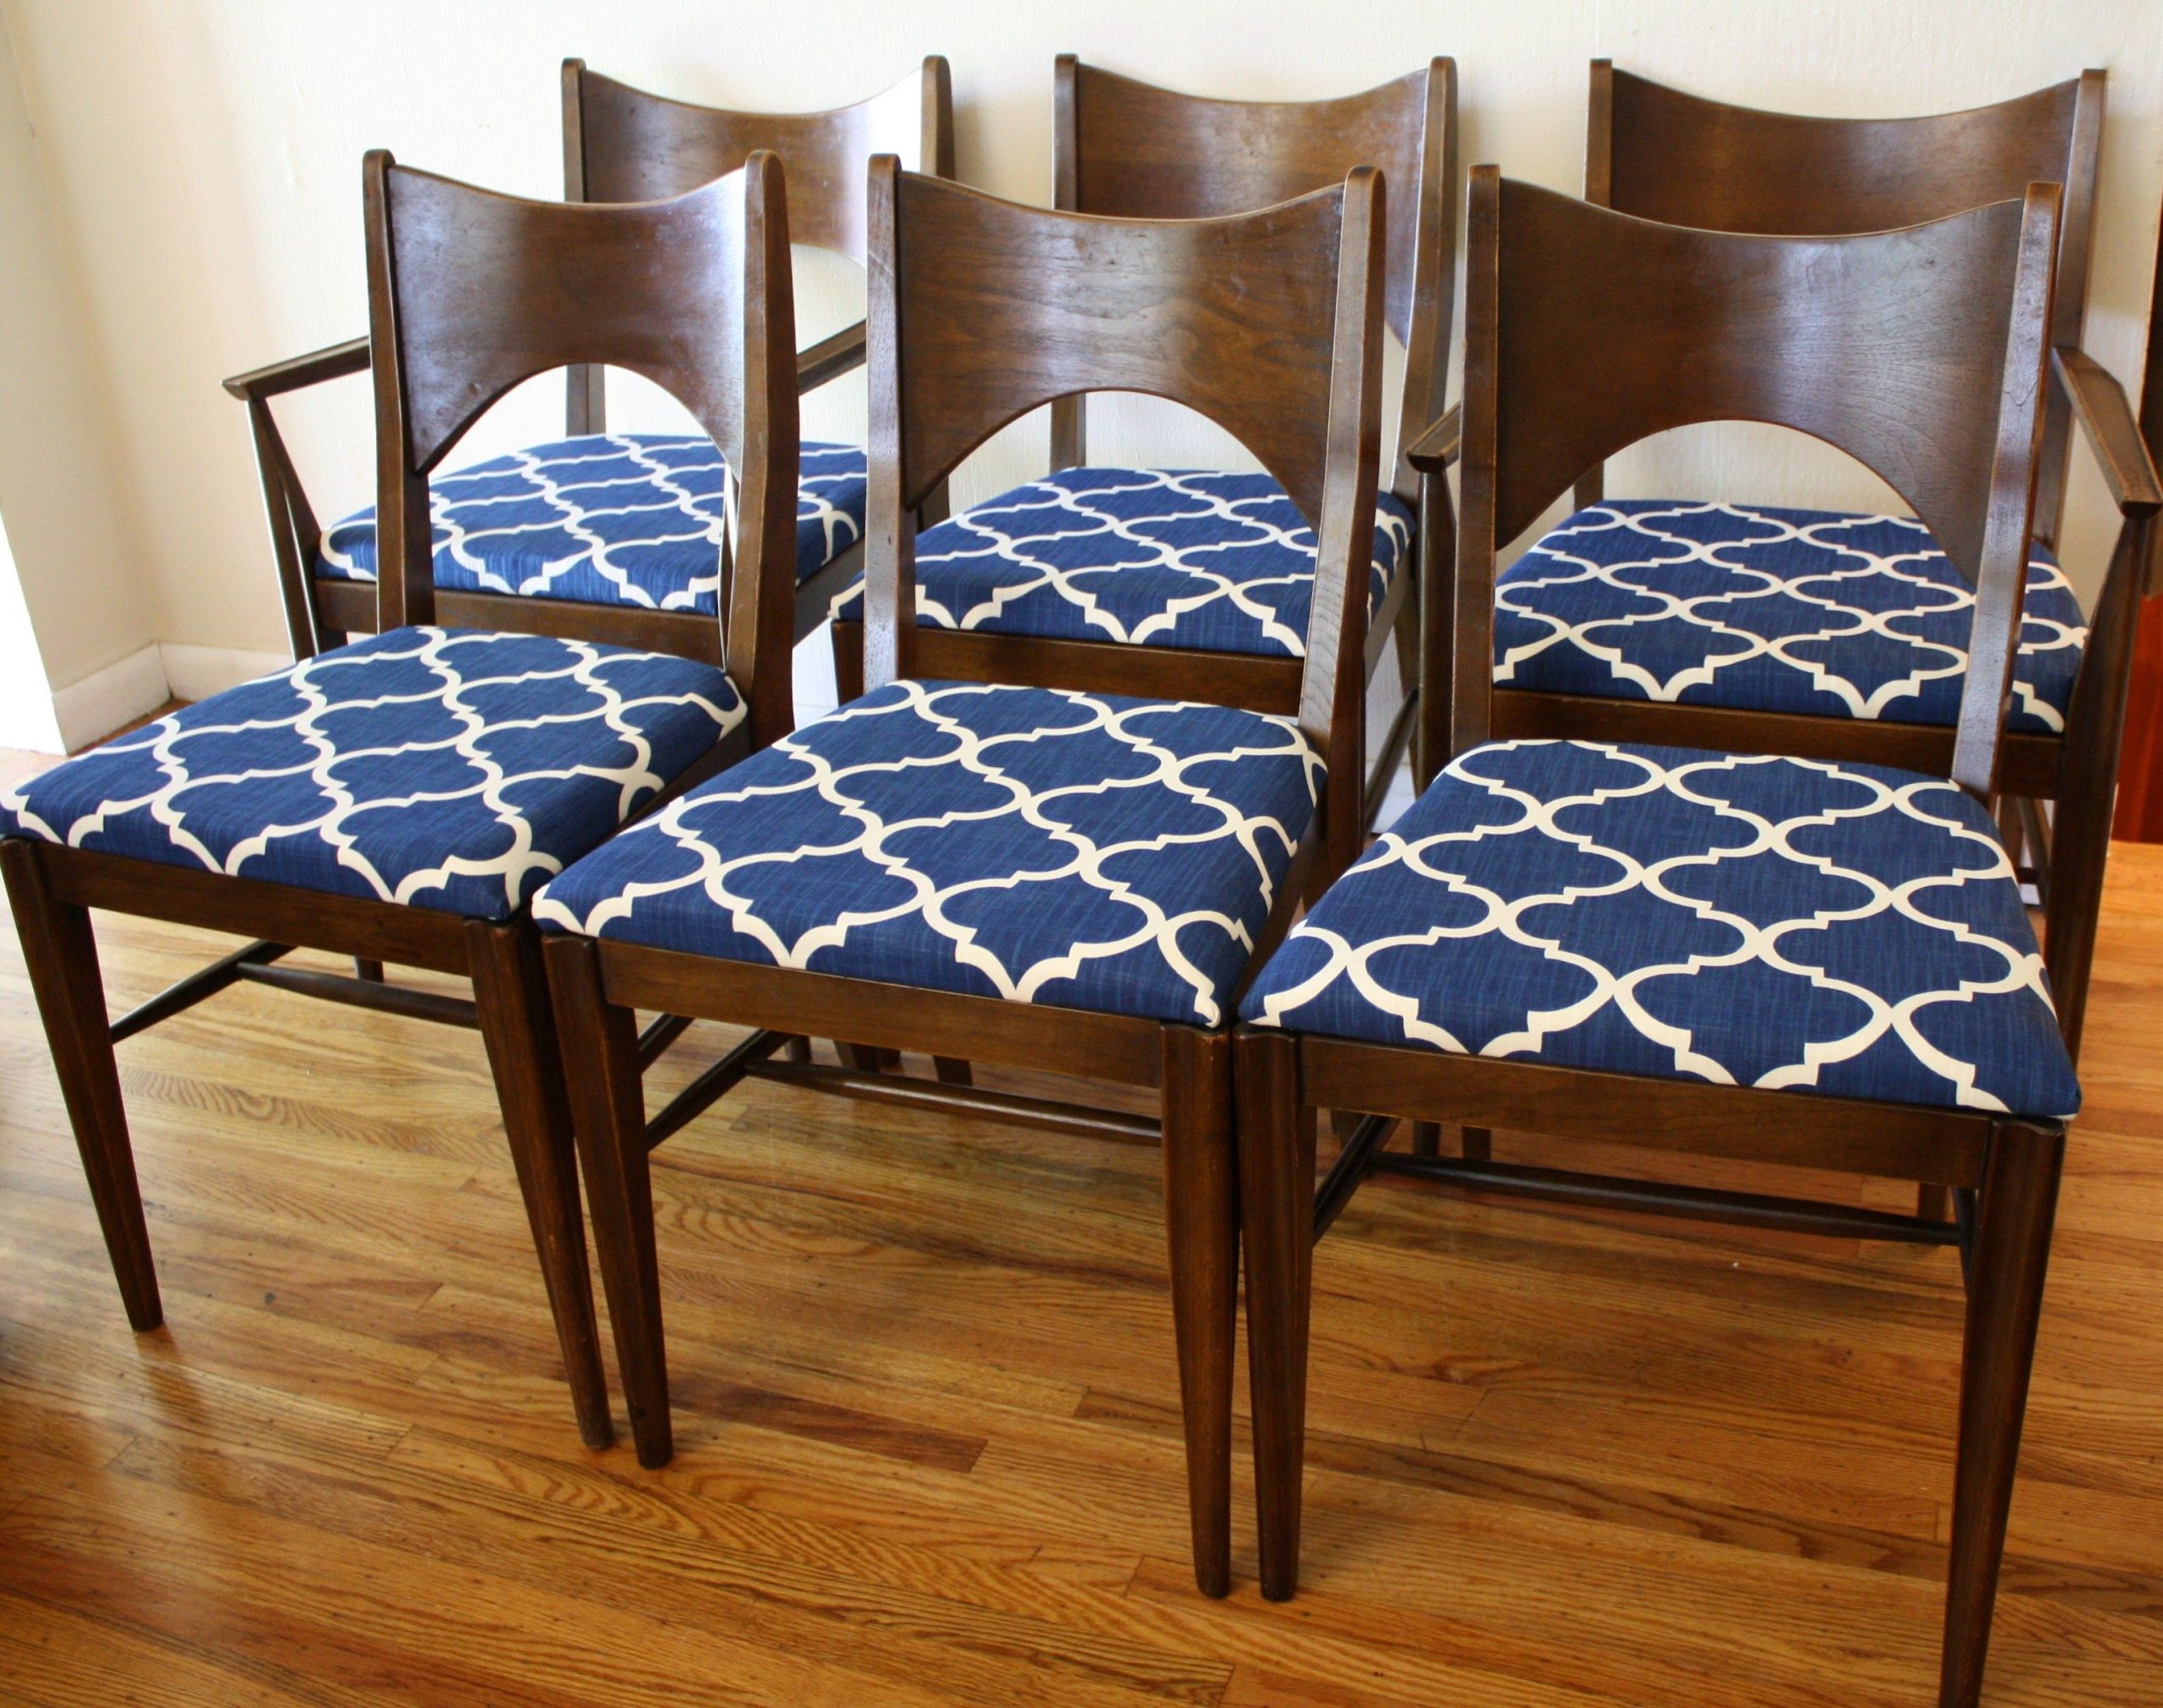 Best Type Of Fabric To Recover Dining Room Chairs • Faucet Ideas Site